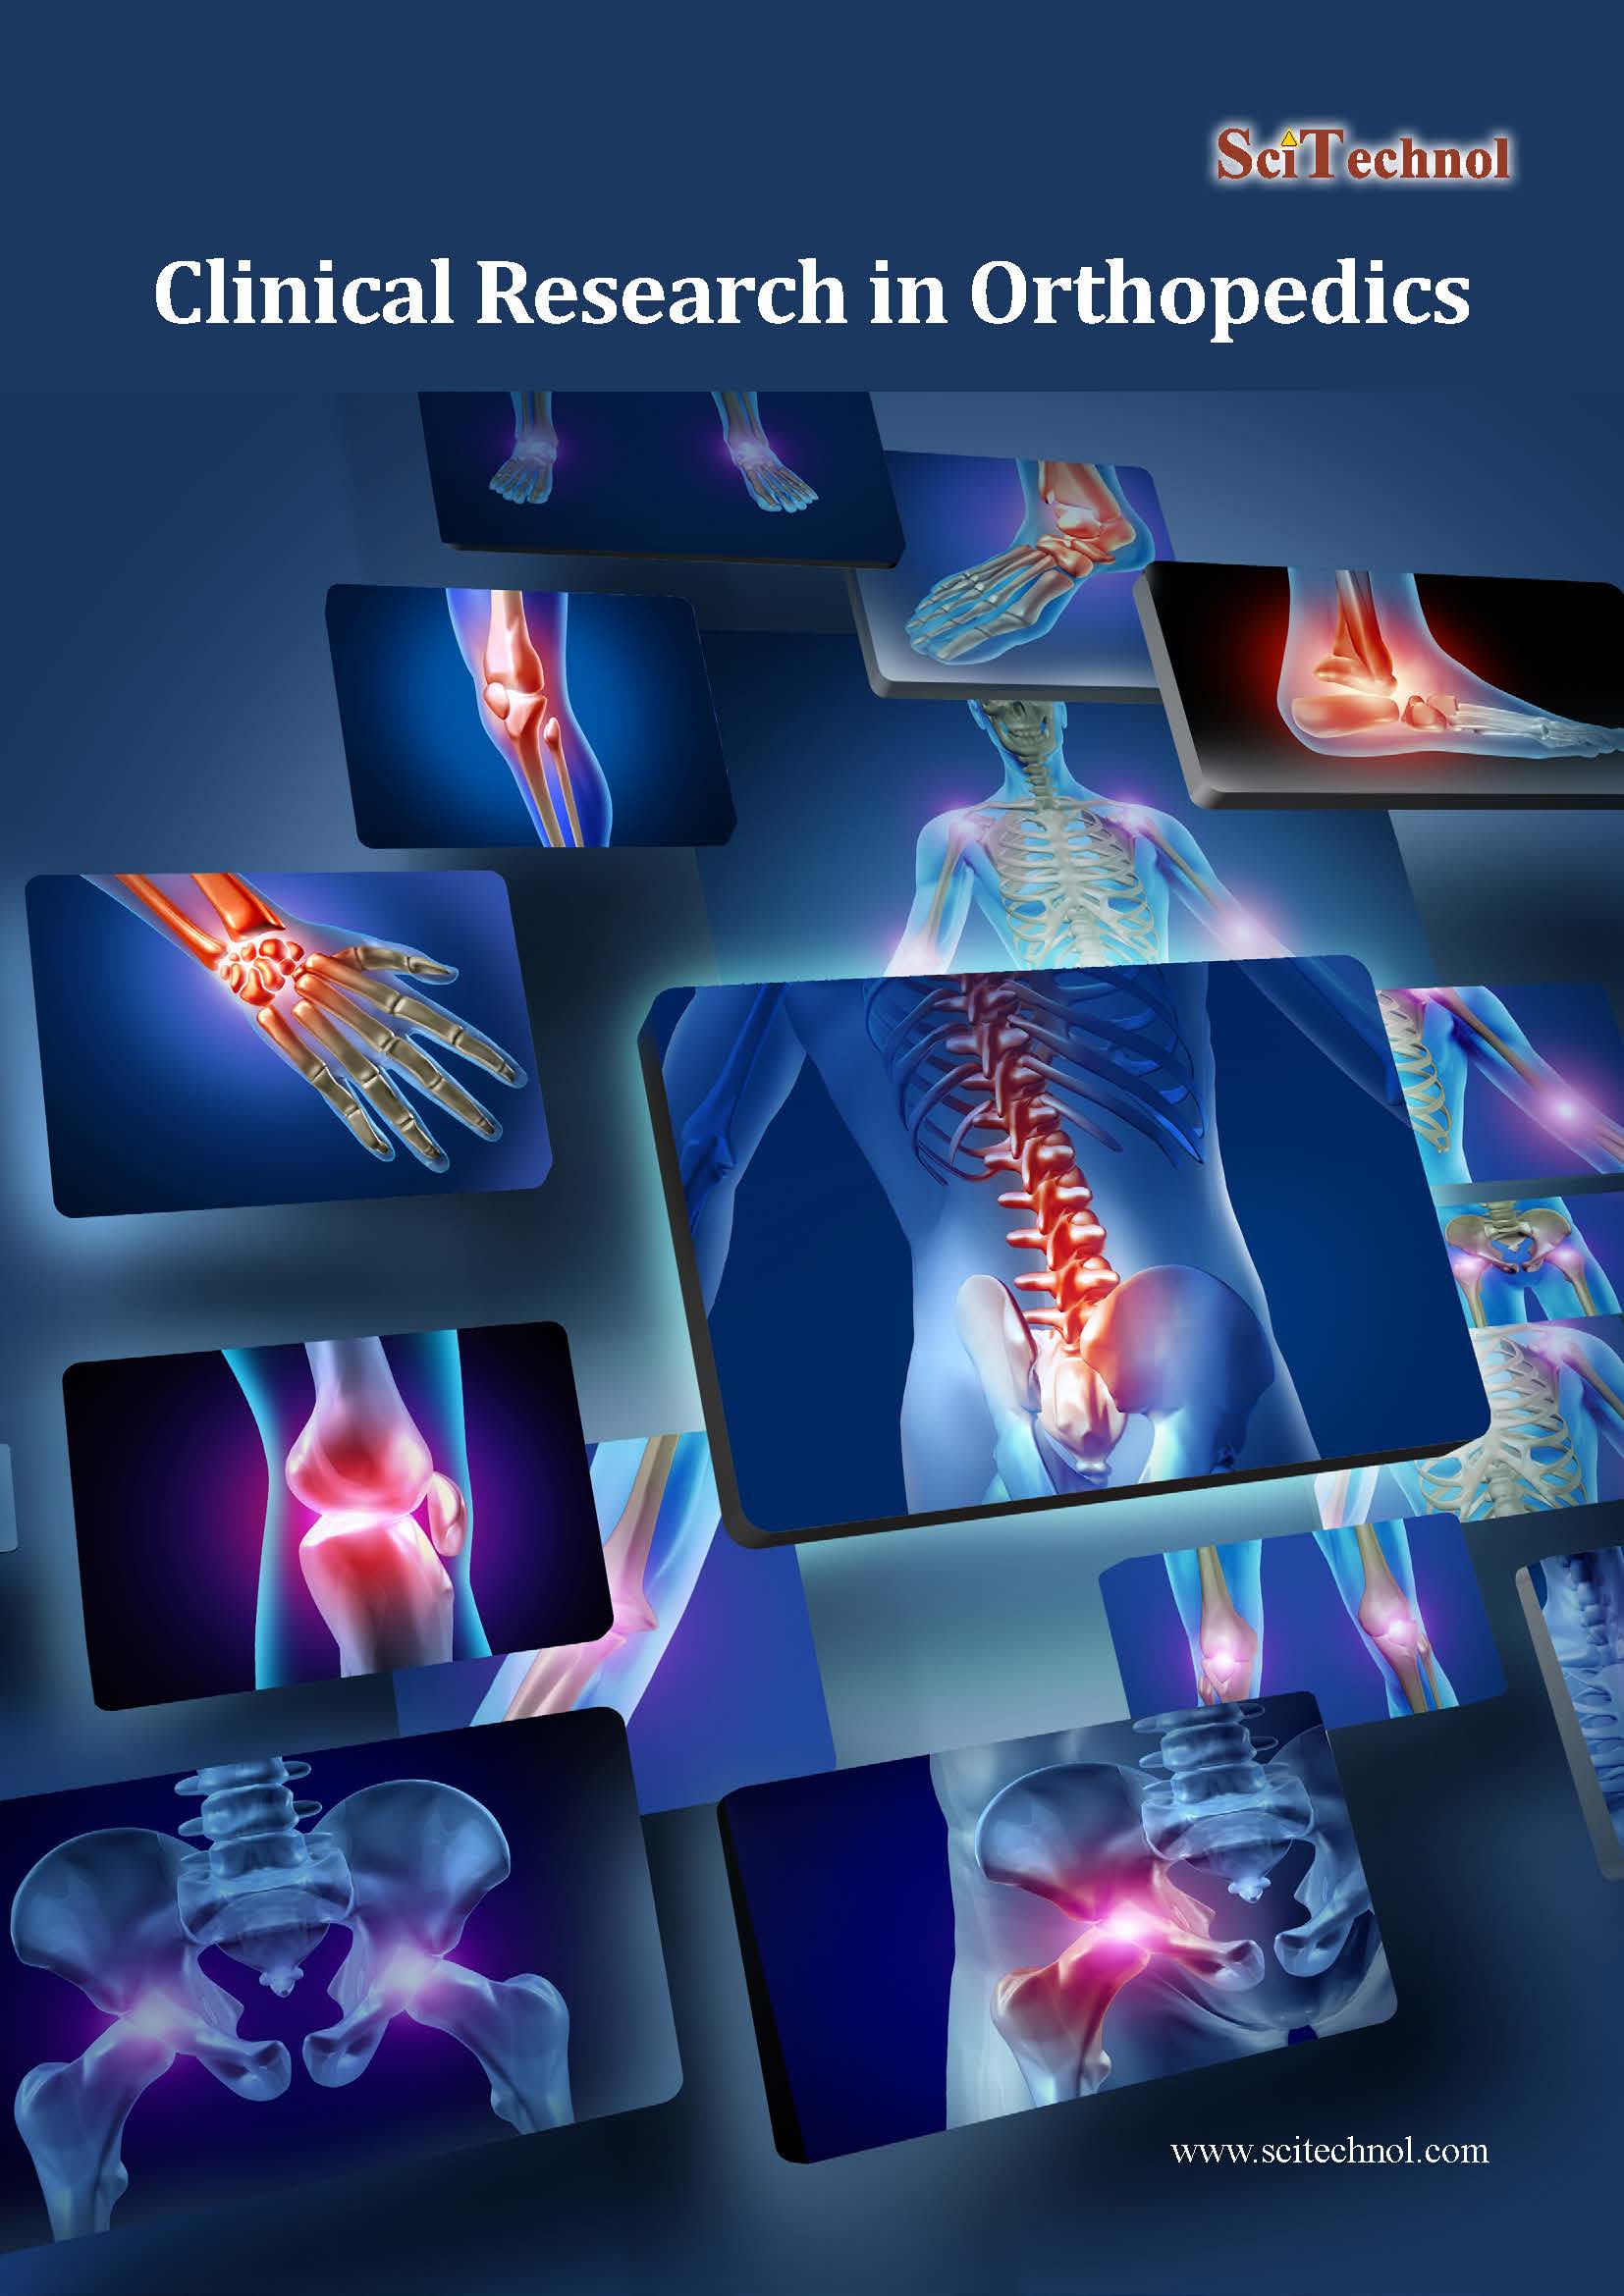 Clinical-Research-in-Orthopedics-flyer.jpg